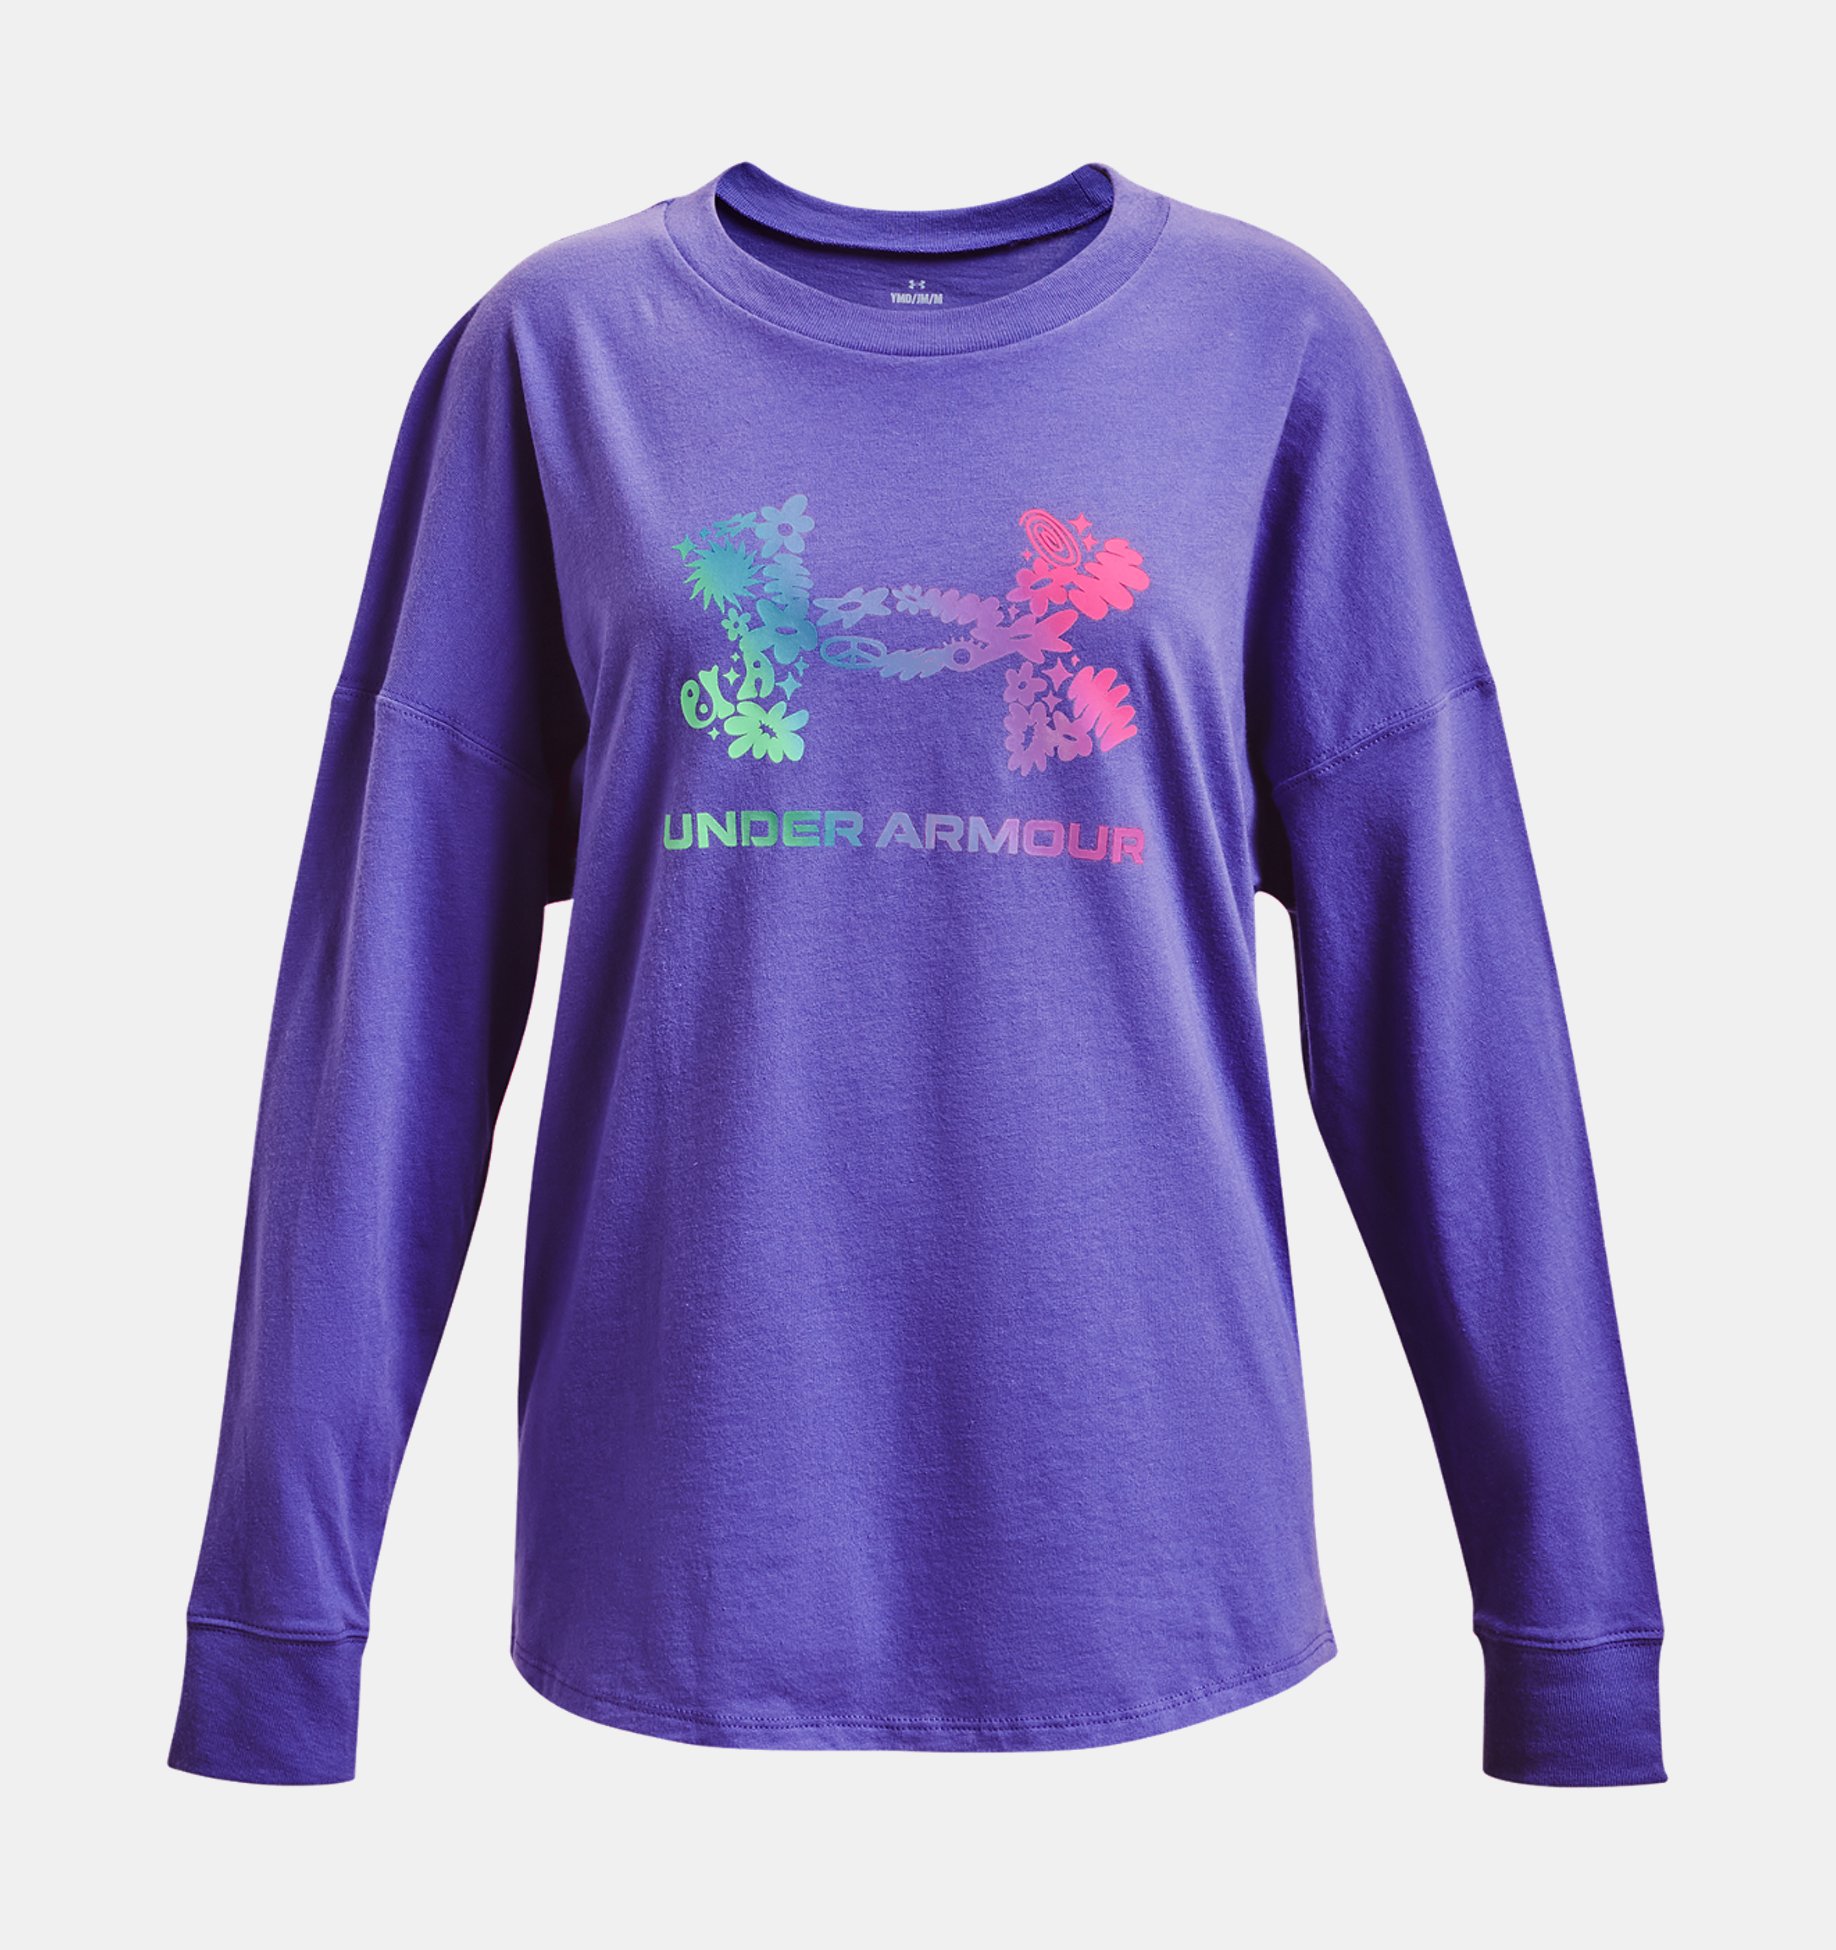 Under Armour Girls' Graphic Long Sleeve Tee 